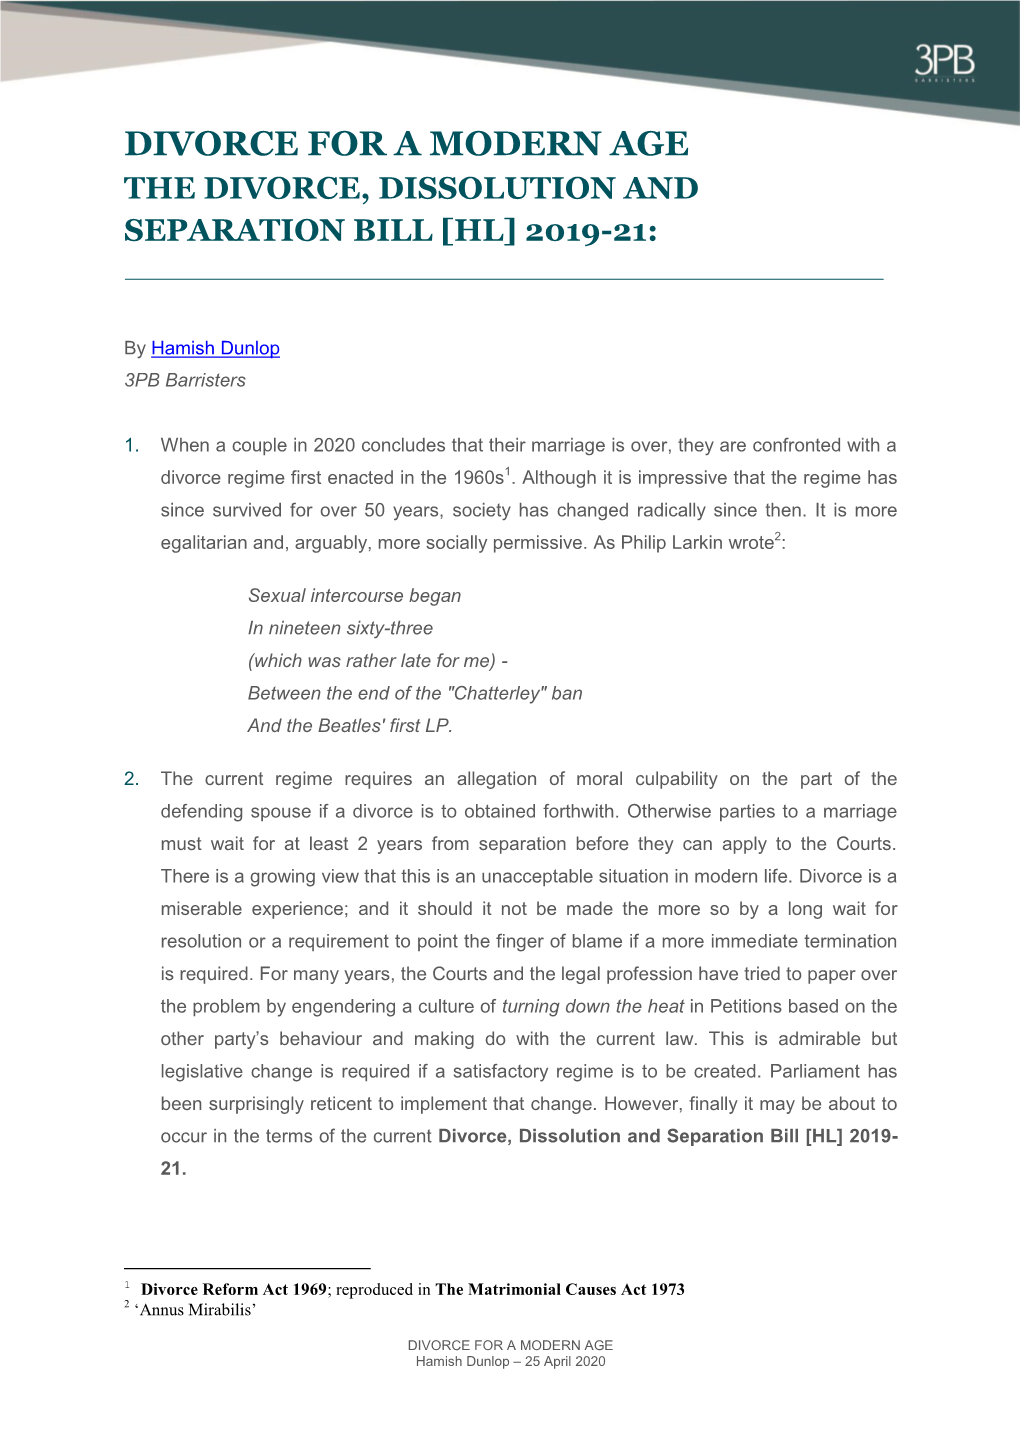 Divorce for a Modern Age the Divorce, Dissolution and Separation Bill [Hl] 2019-21